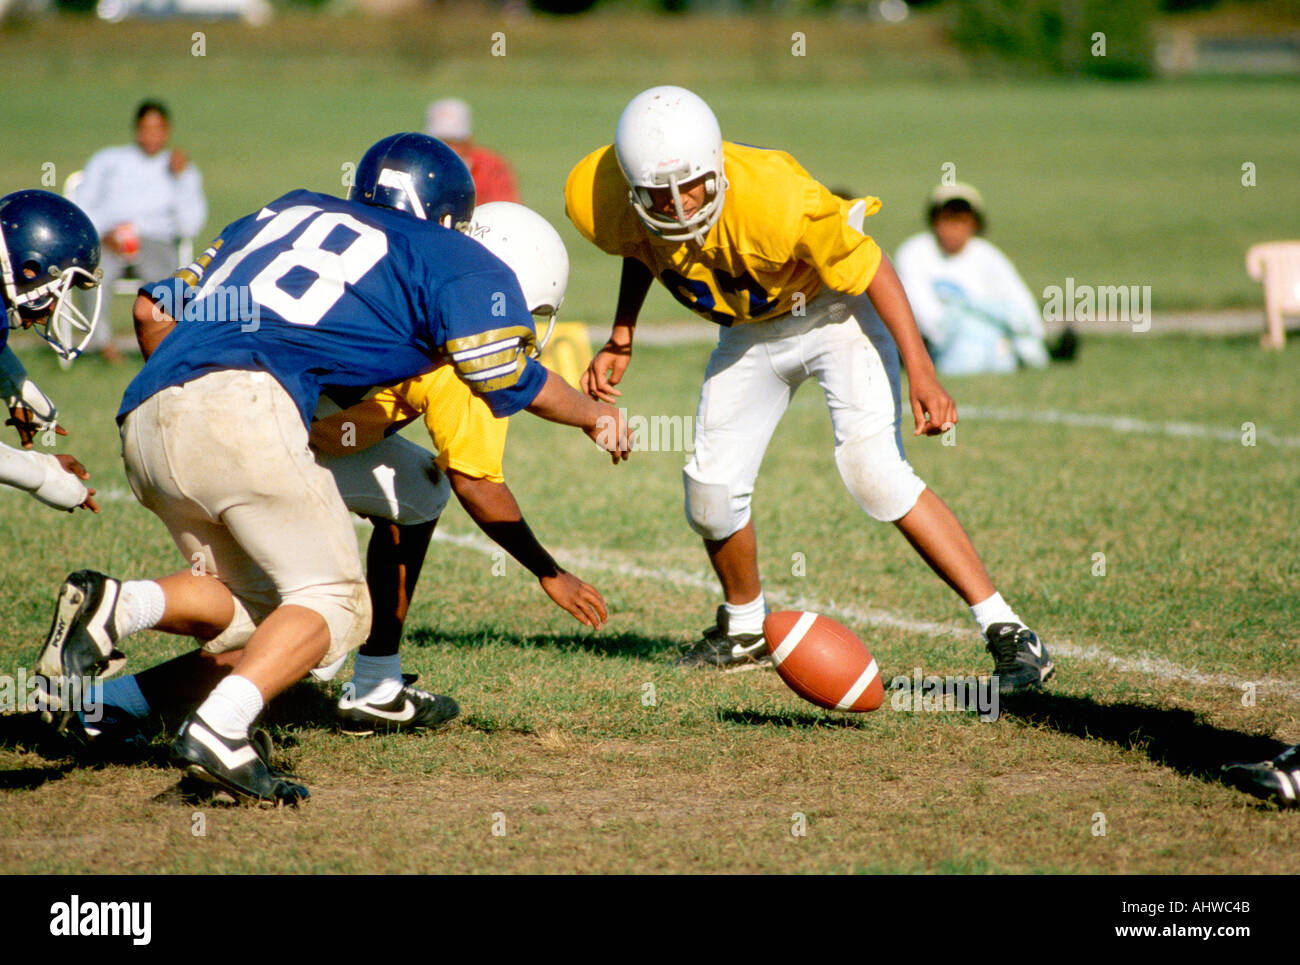 Junior varsity football action the ball is fumbled during this play Stock Photo